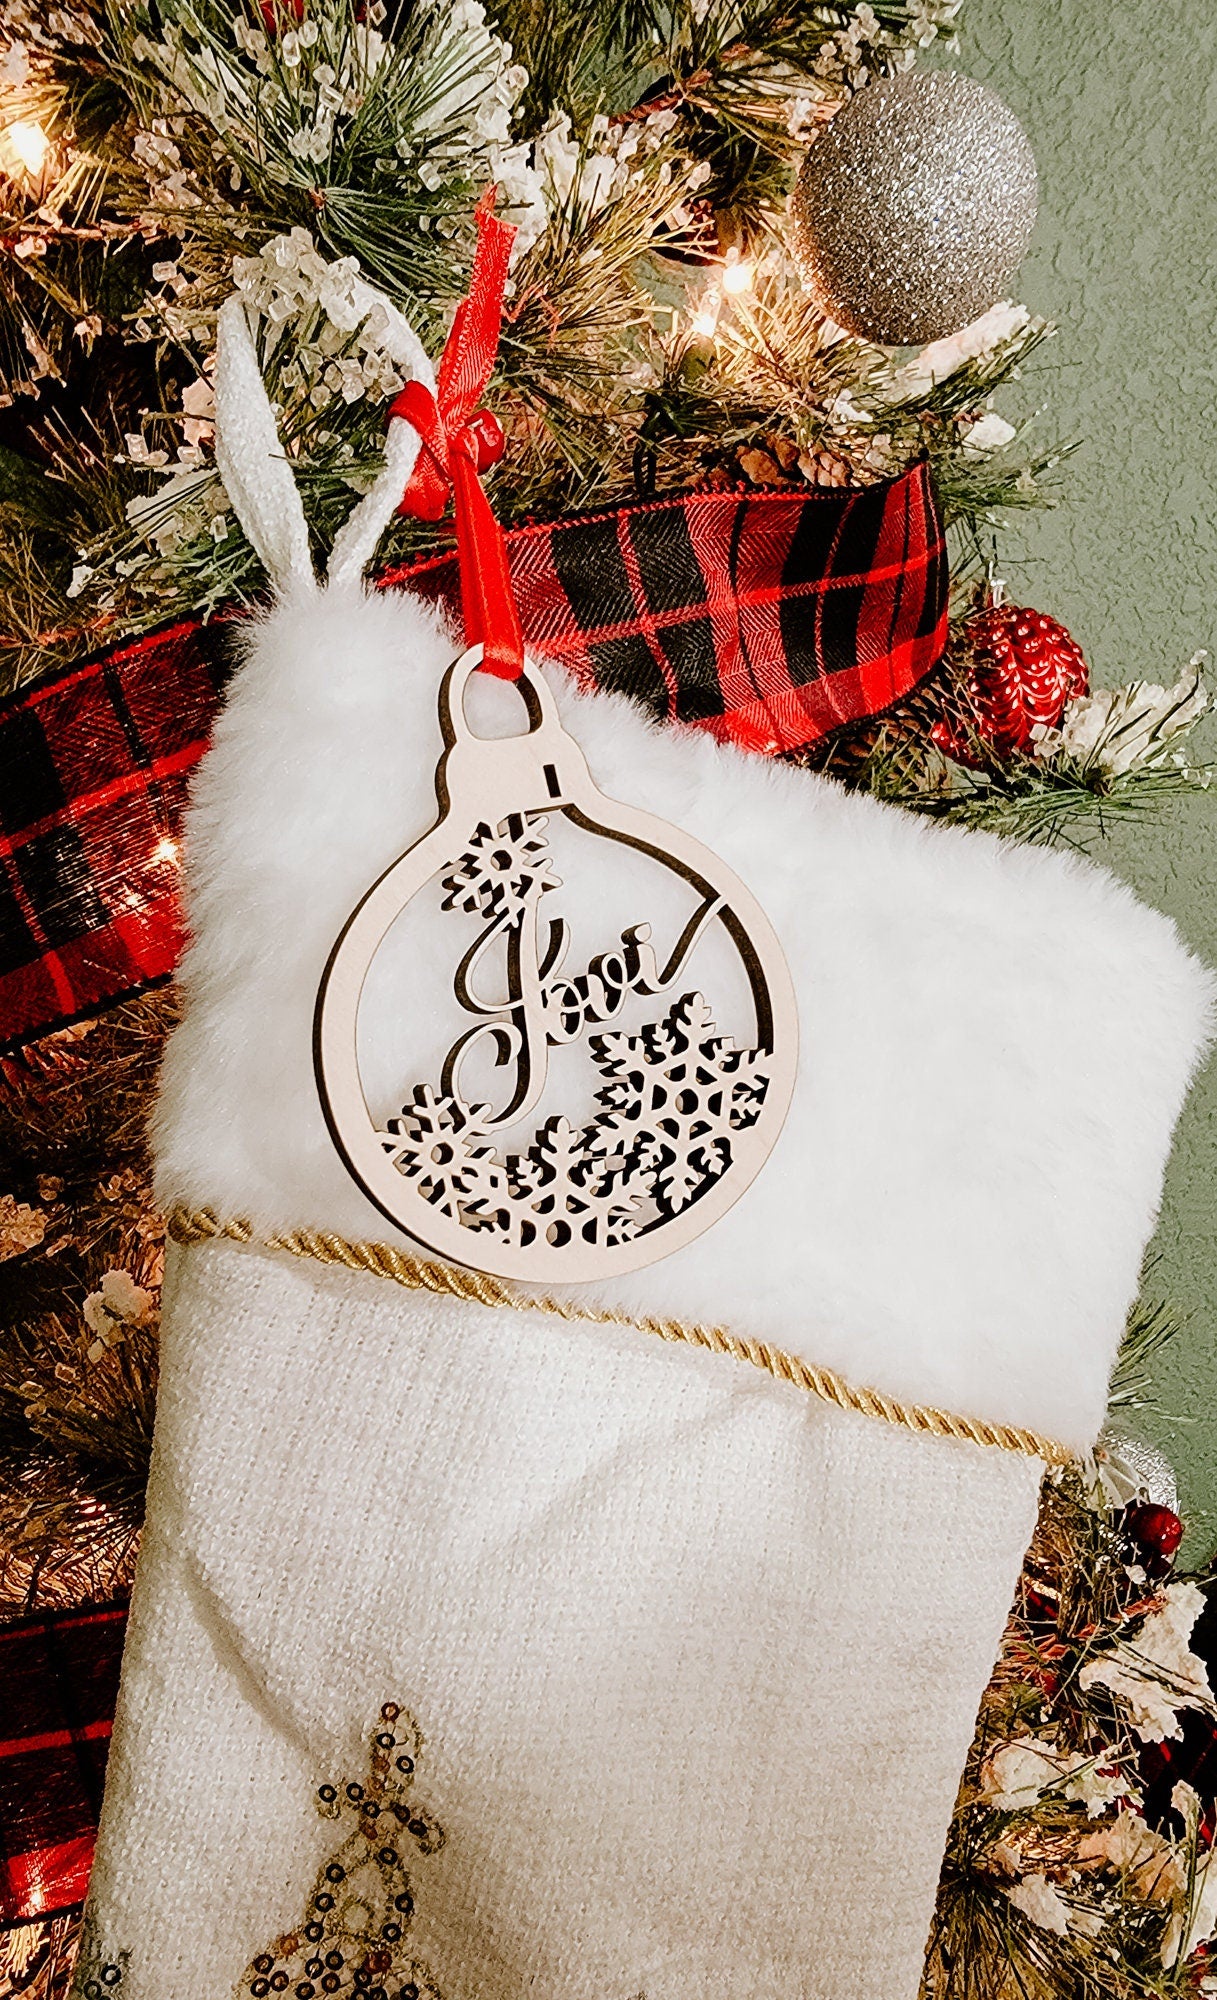 Personalized Holiday Ornaments